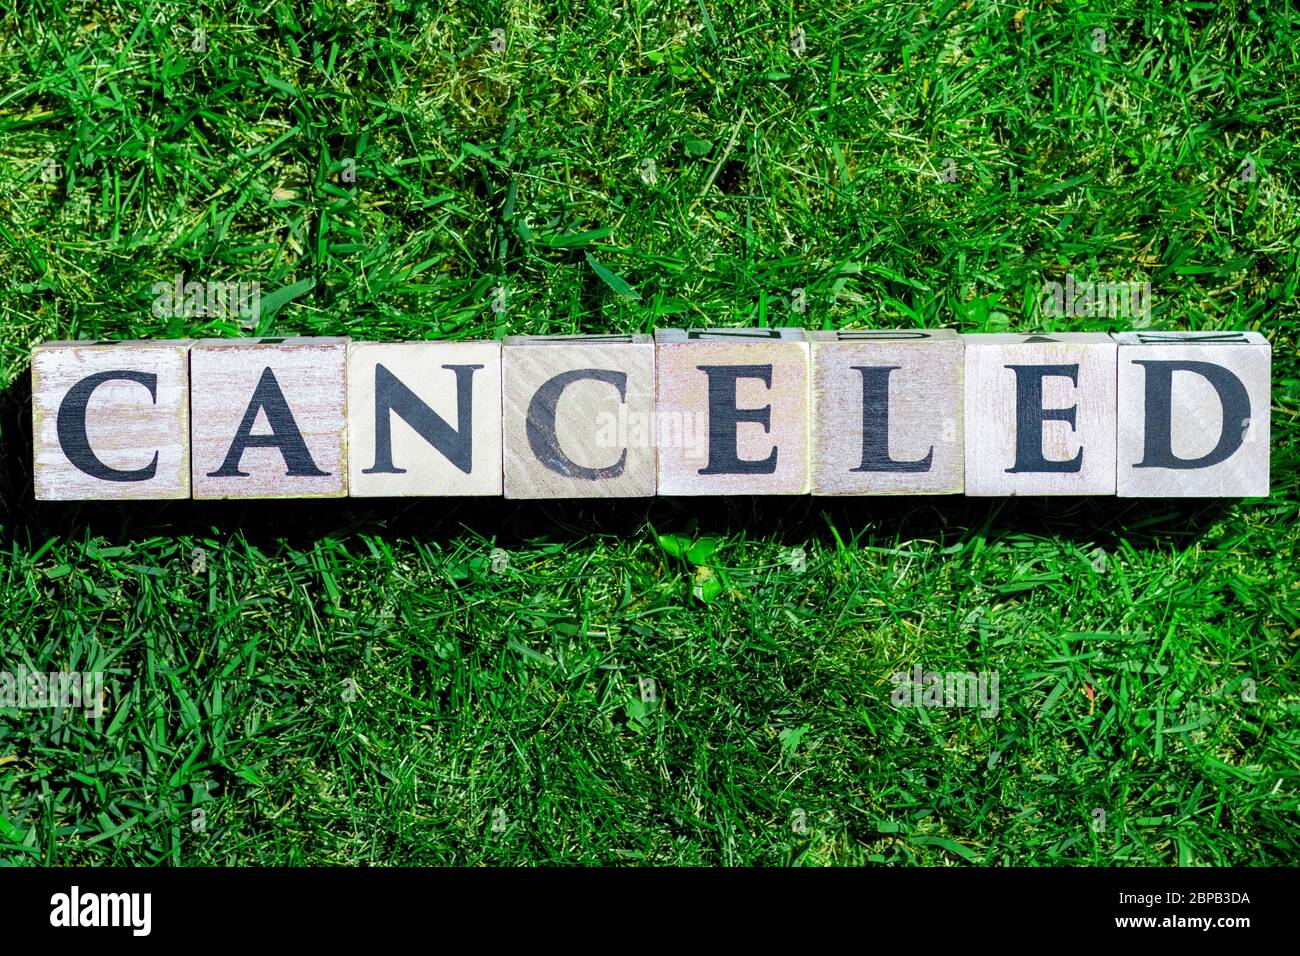 Canceled written on wooden blocks isolated on a green gras background Stock Photo